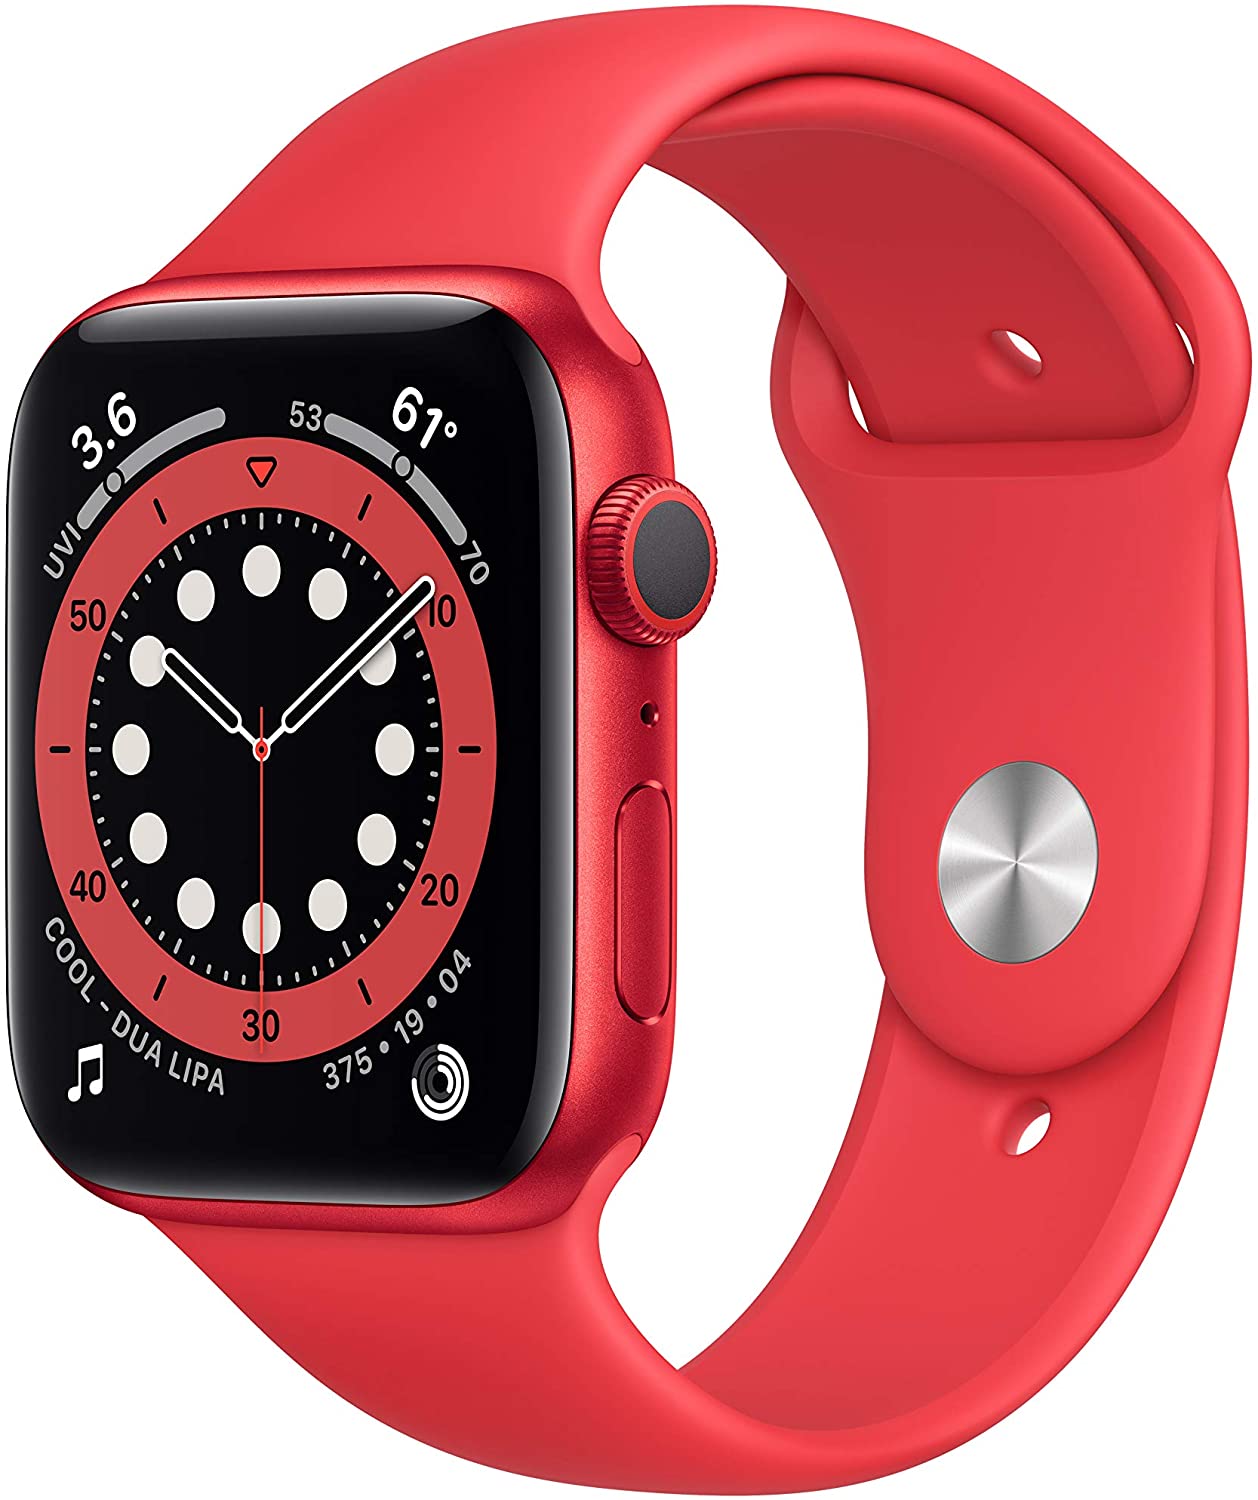 Cruise gear for Prime Day - Red Apple Watch with analog clock display